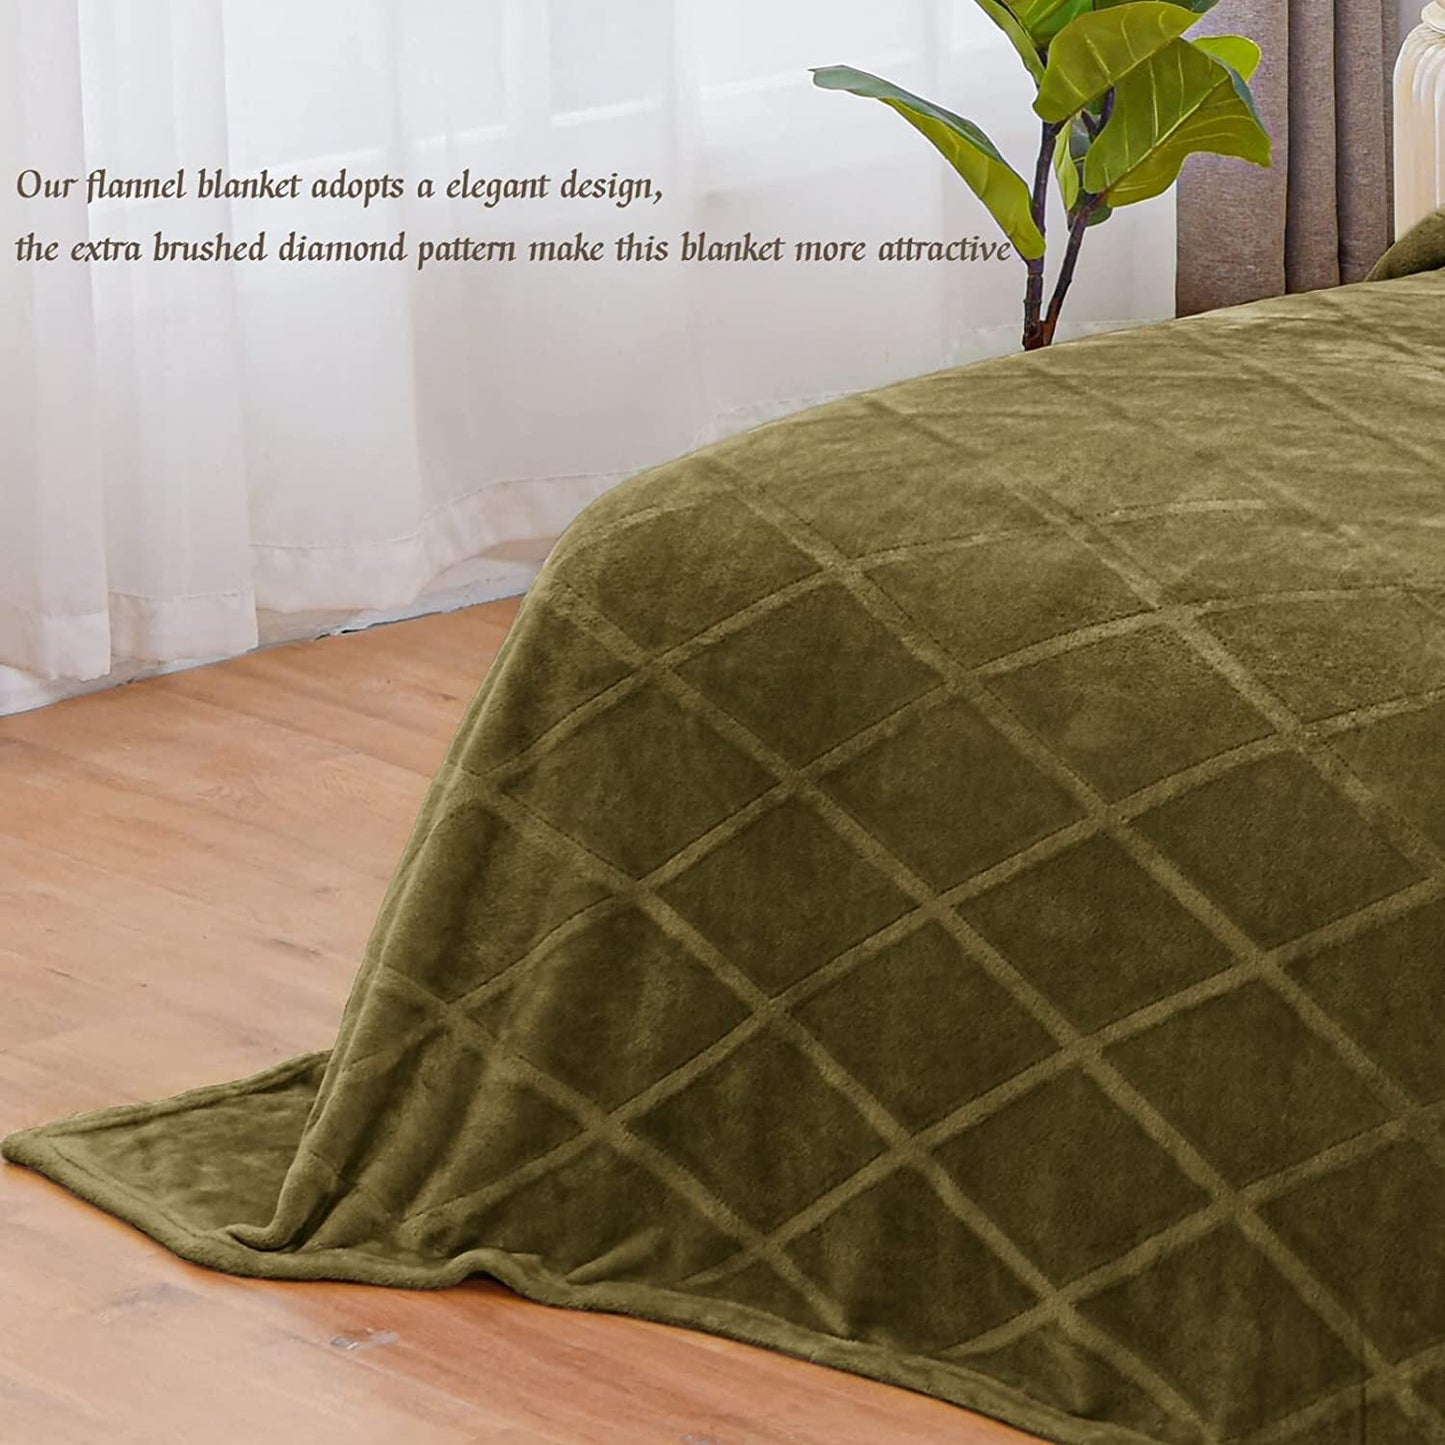 Exclusivo Mezcla Queen Size Flannel Fleece Blanket, 90x90 Inches Soft Diamond Geometry Pattern Velvet Plush Blanket for Bed, Cozy, Warm, Lightweight and Decorative Olive Green Blanket